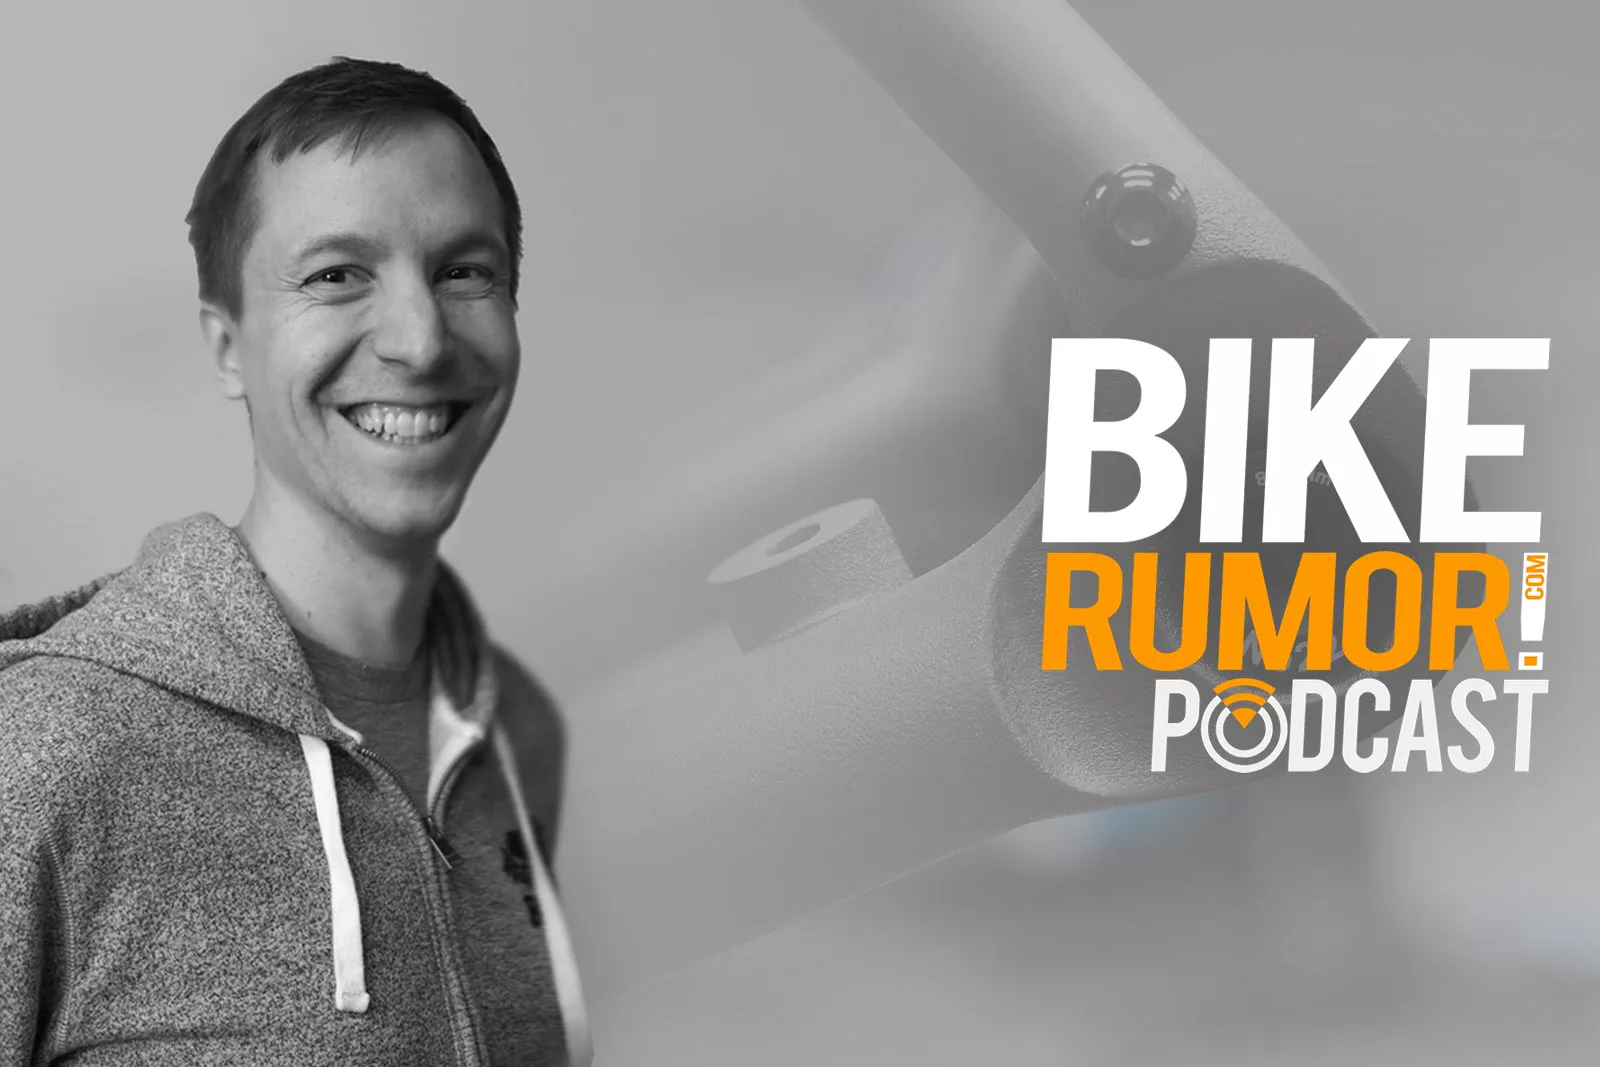 No22 bicycles mike smith explains how 3d printed titanium bike parts work in this podcast interview